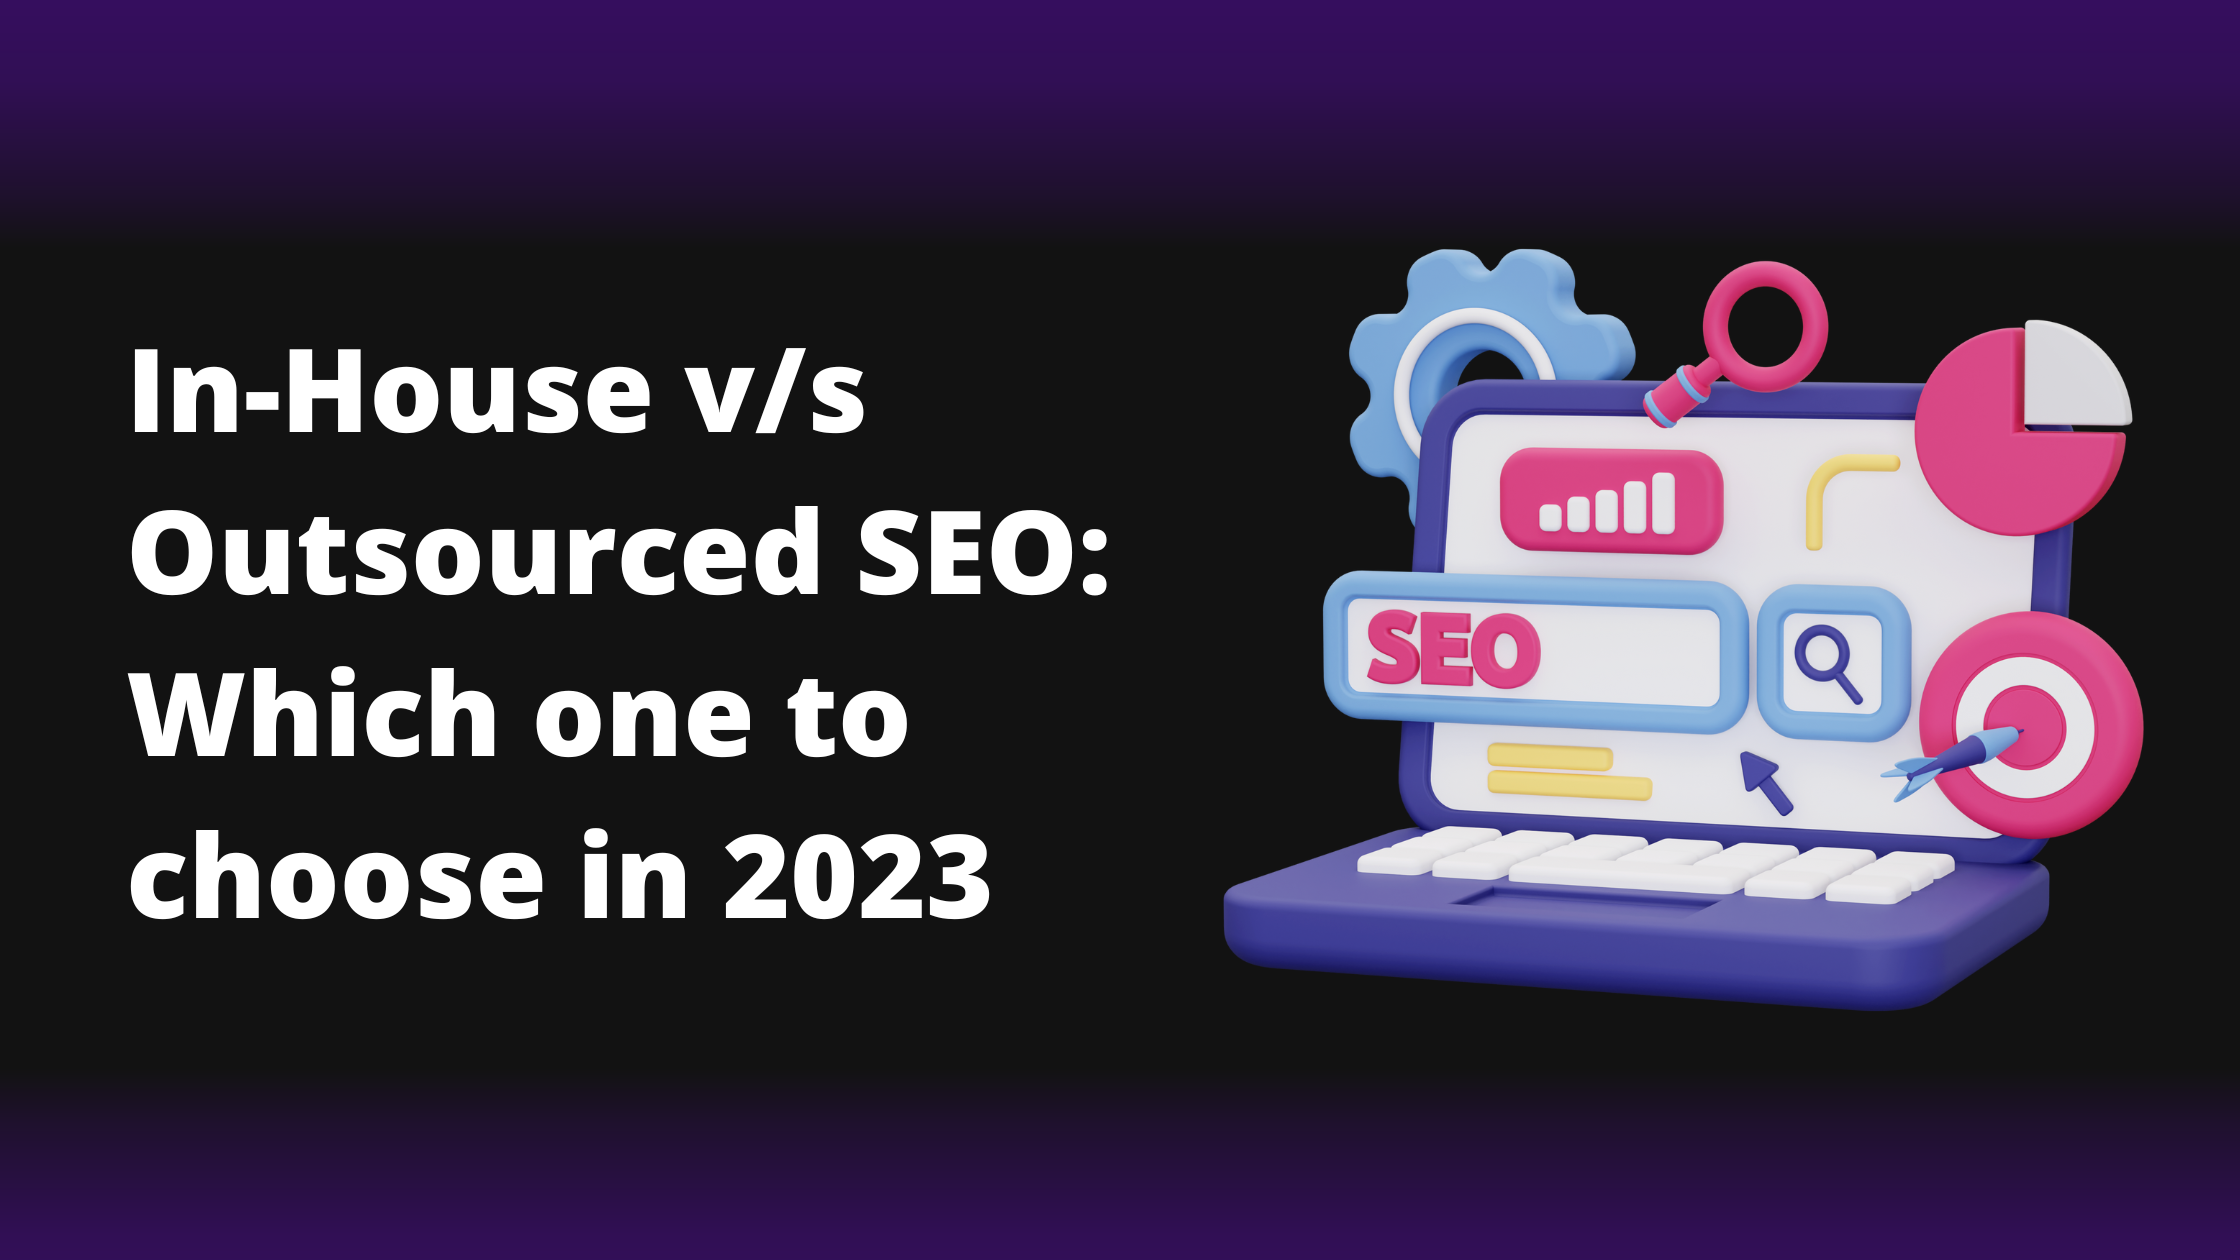 In-House vs Outsourced SEO: Which One To Choose In 2023